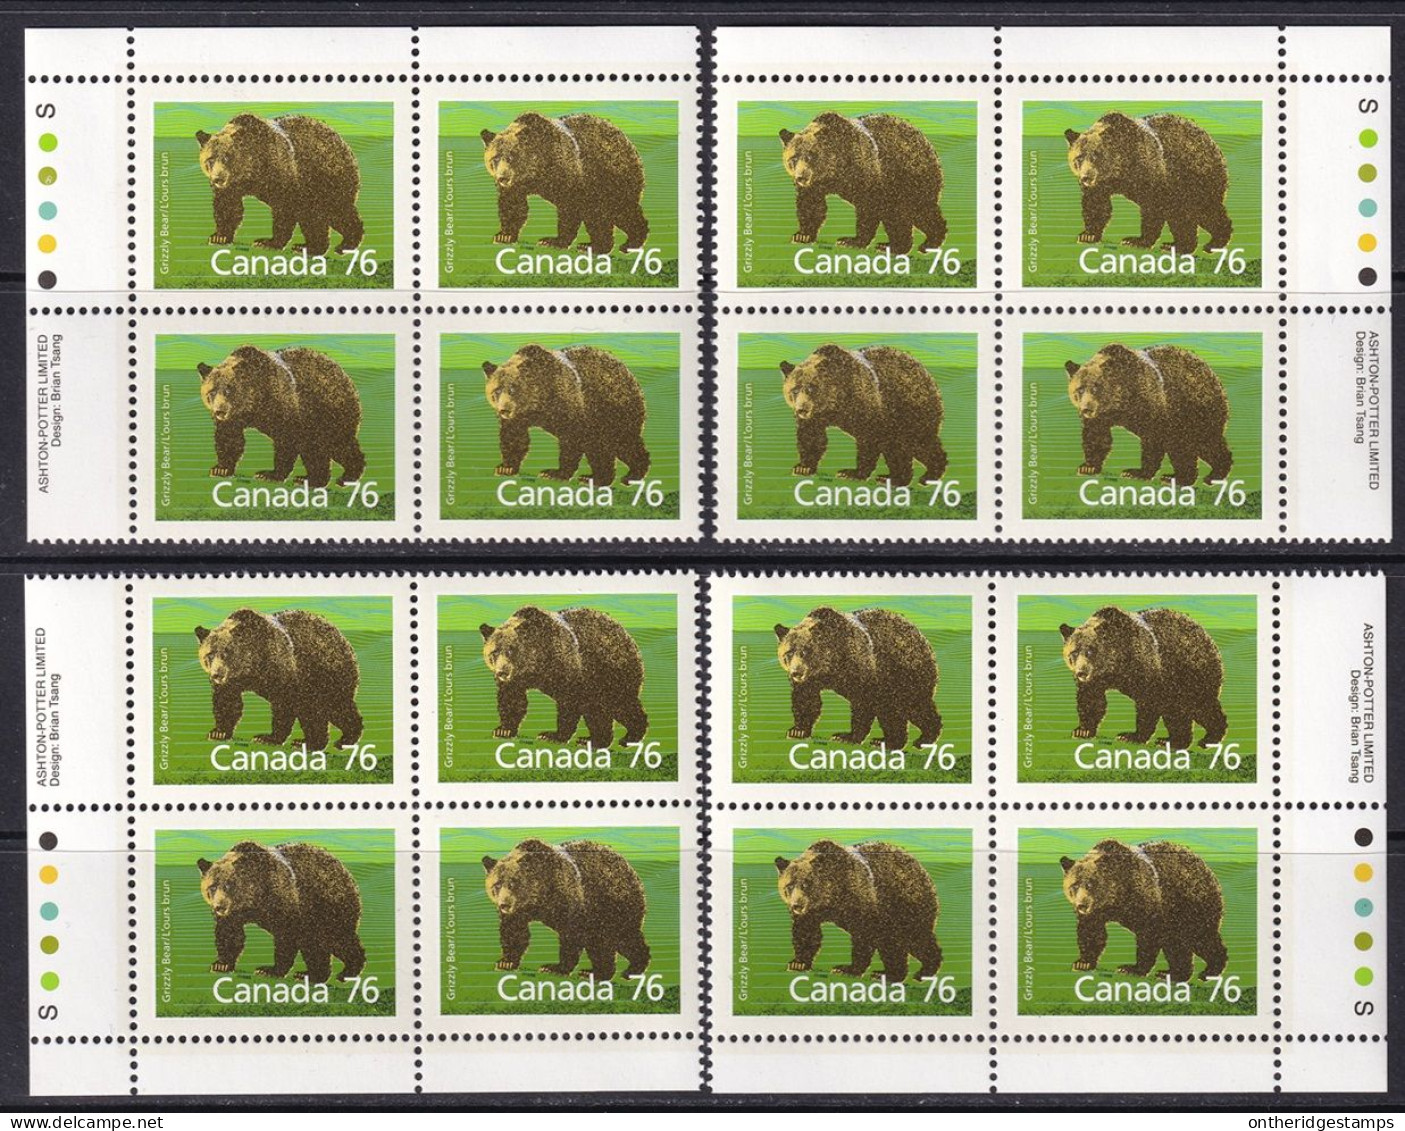 Canada 1989 Sc 1178i  Plate Block Set MNH** Slater Paper Perf 14.4x13.8 - Unused Stamps